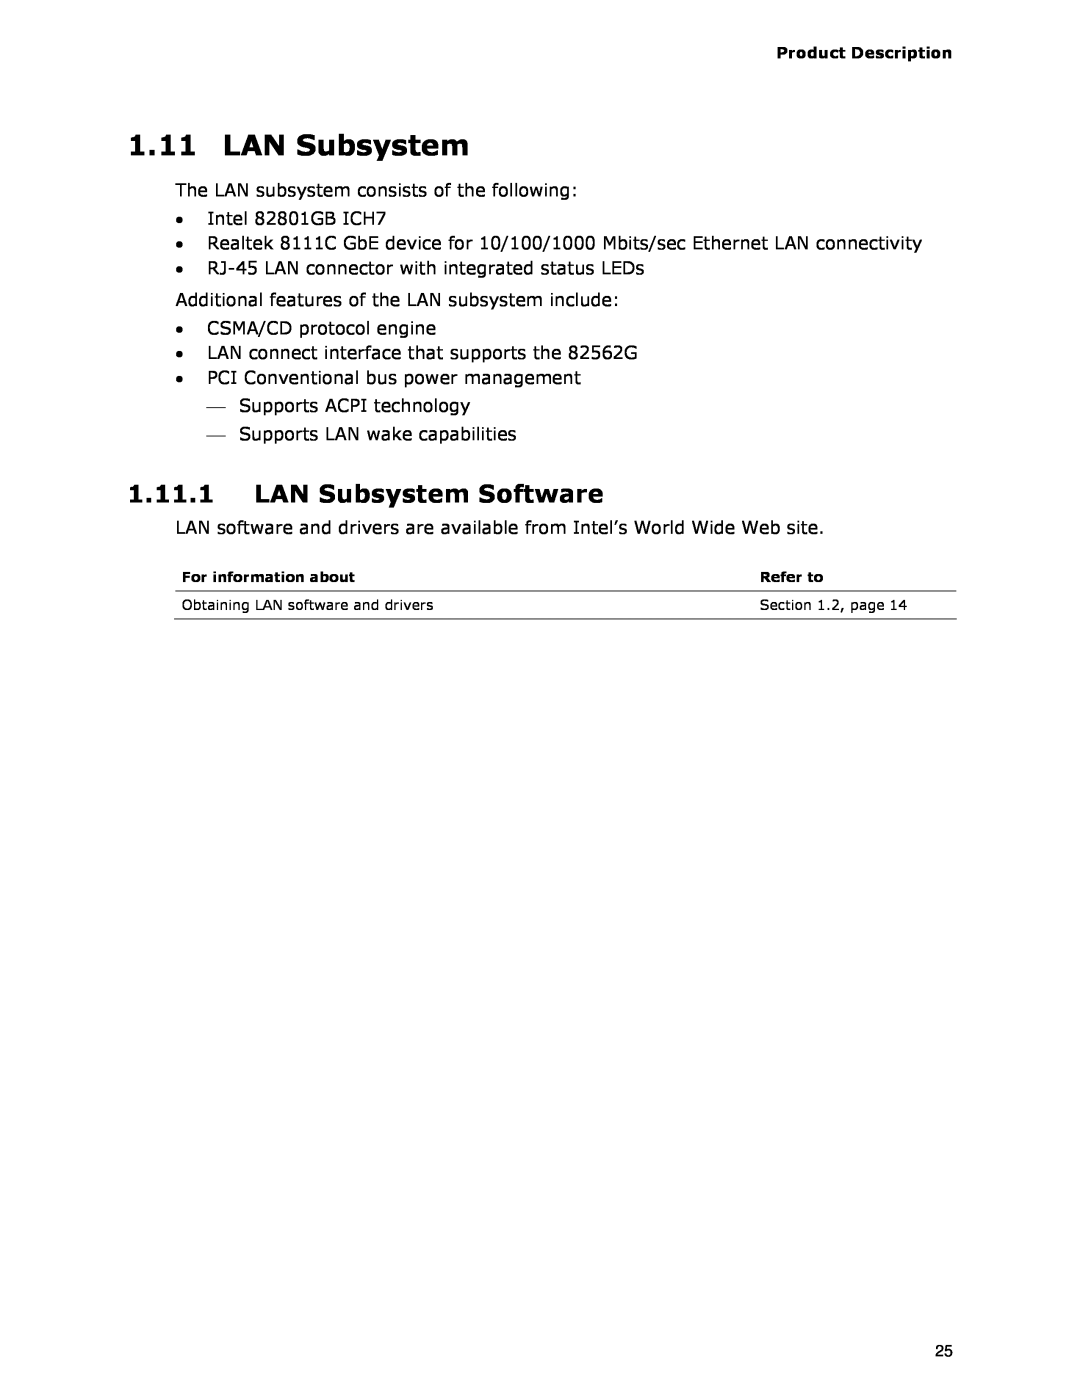 Intel D945GCLF2 specifications LAN Subsystem Software 